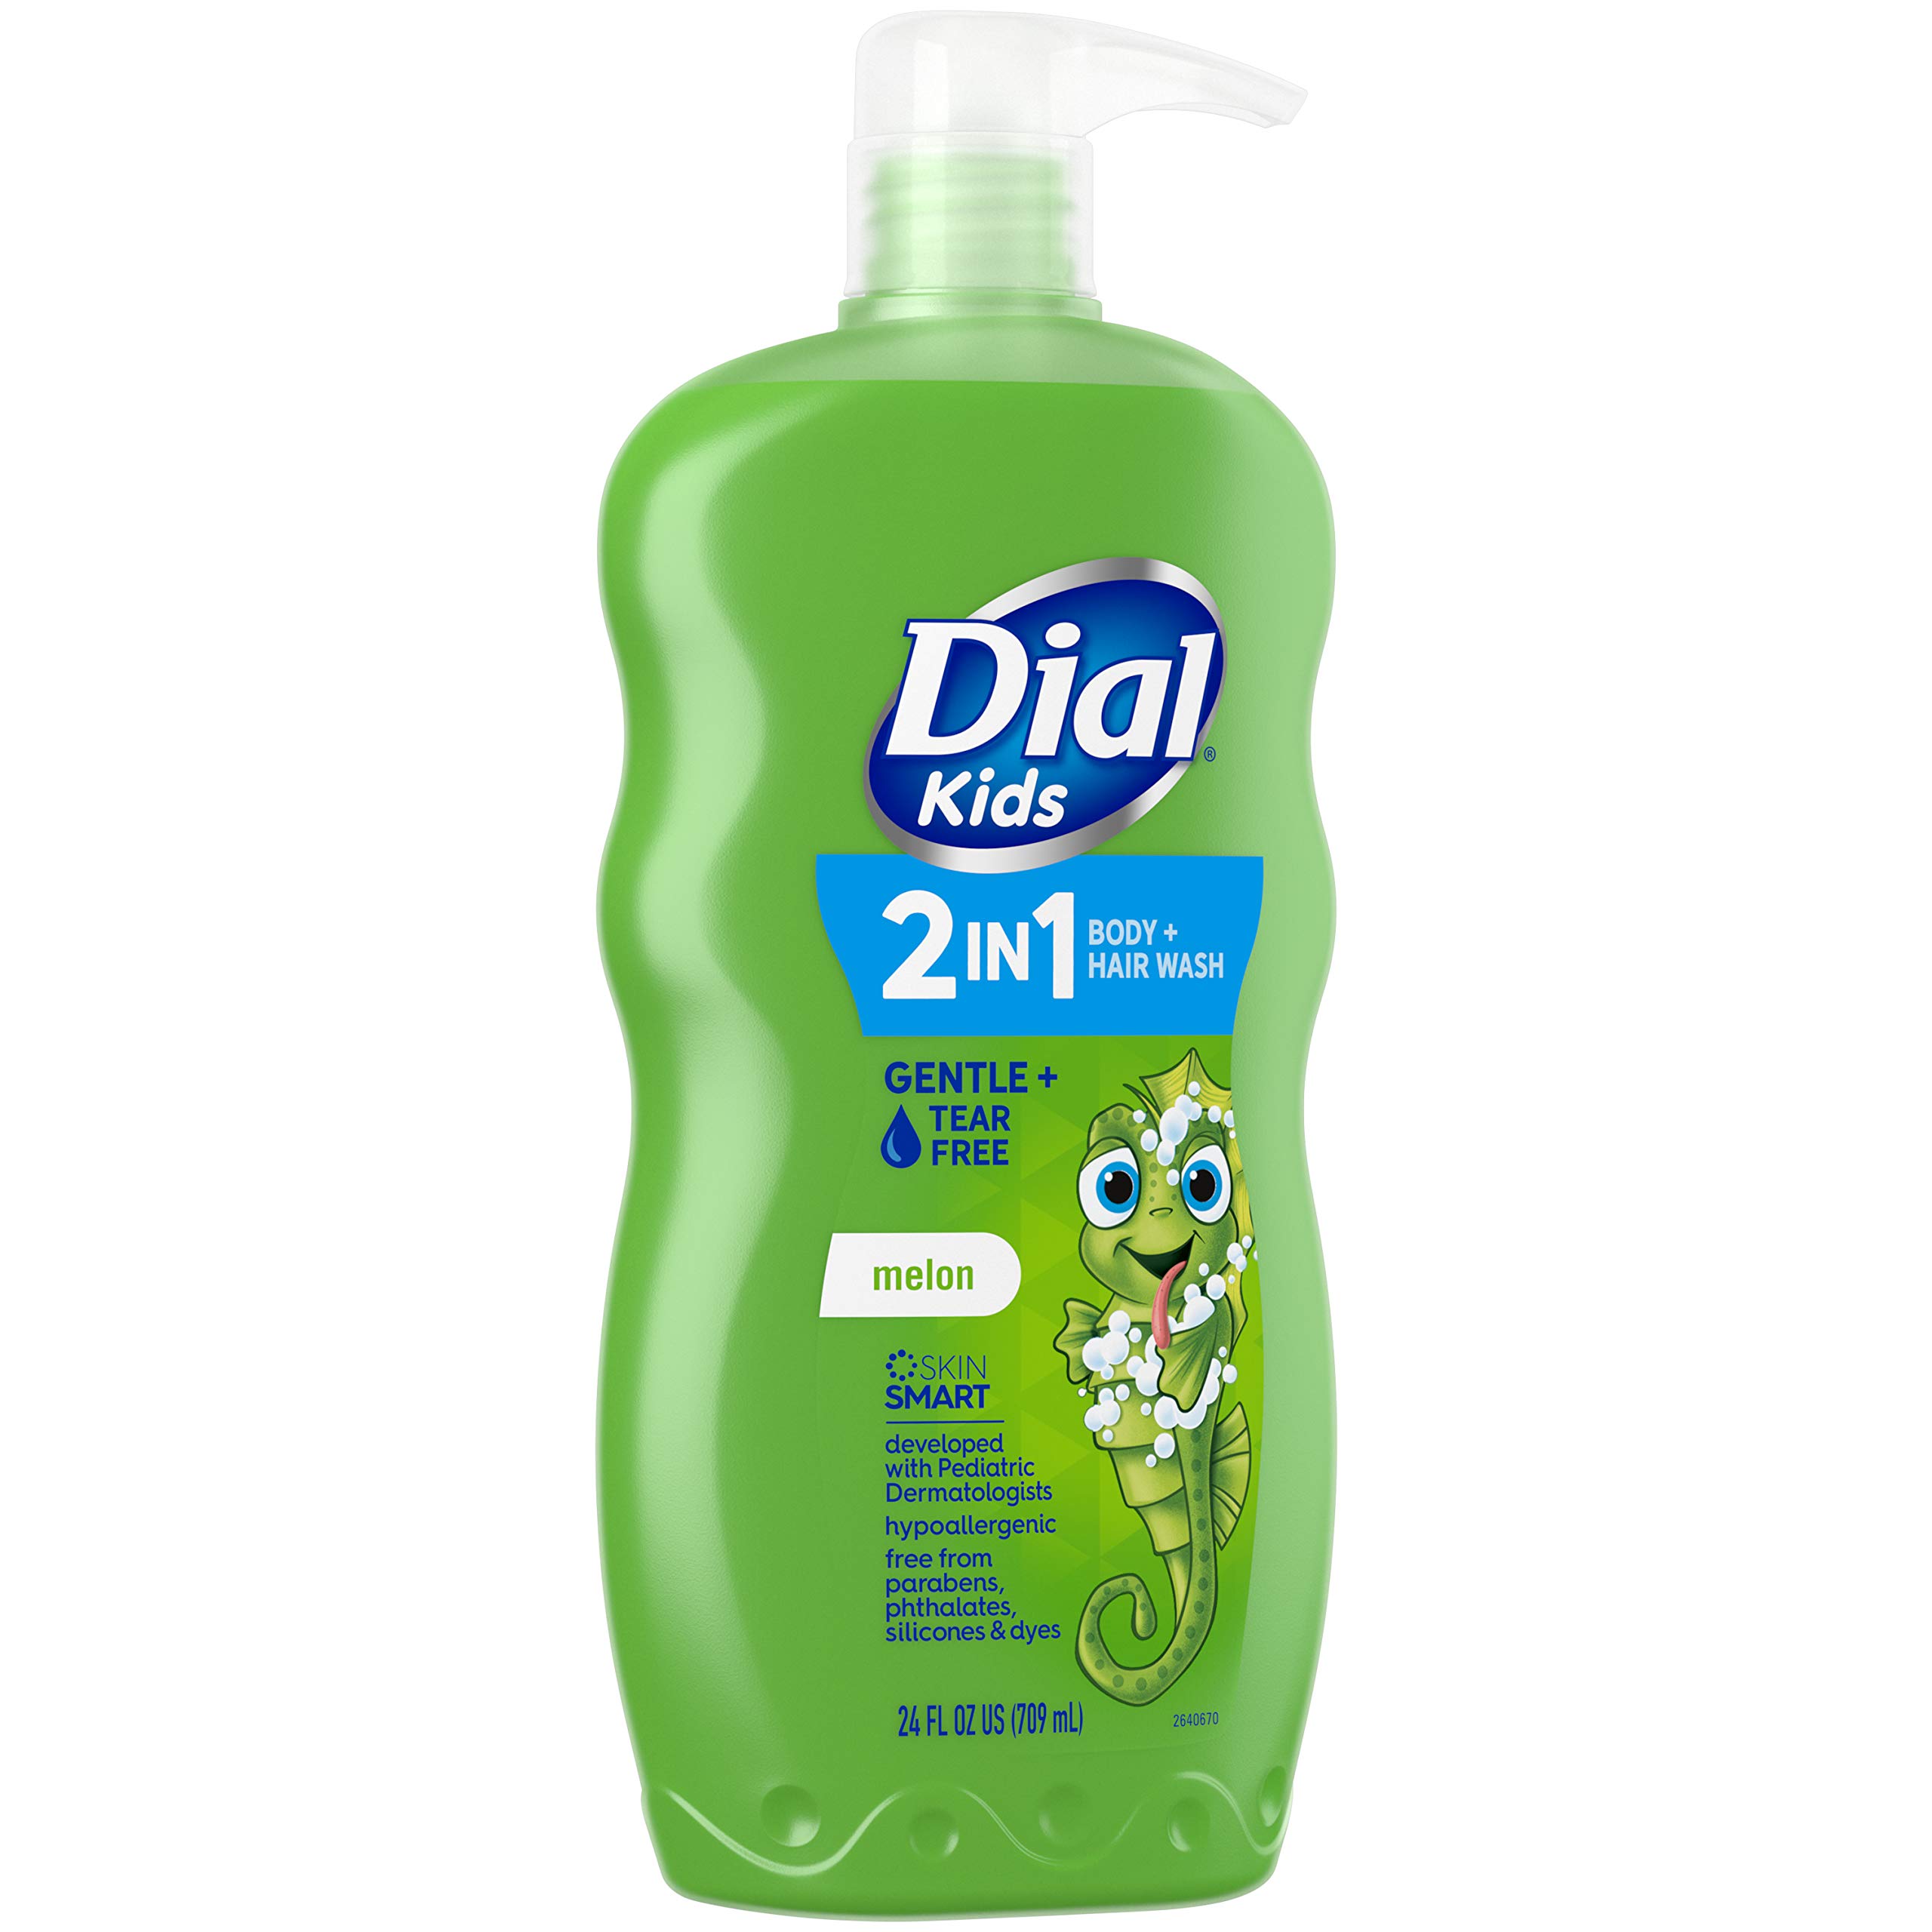 Dial Kids 2-in-1 Body+Hair Wash, Melon, 24 fl oz (Pack of 4)